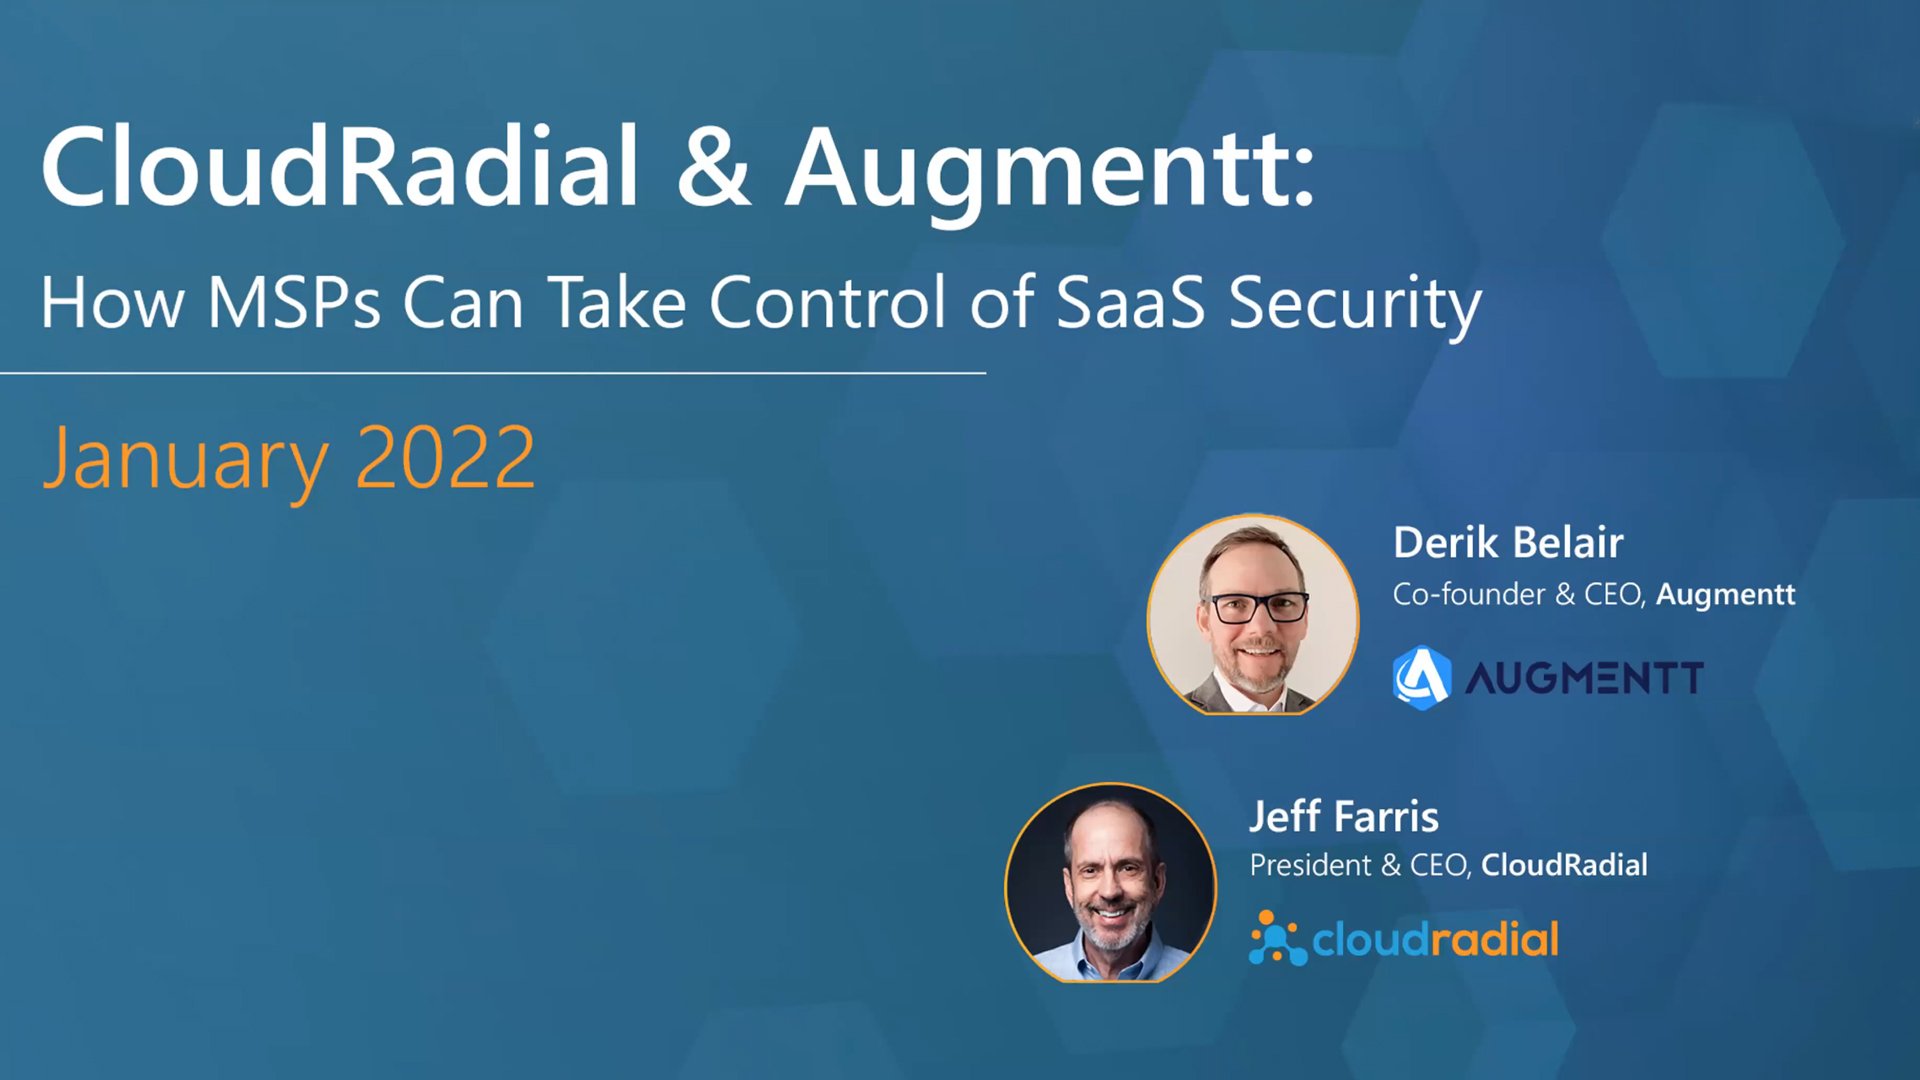 CloudRadial & Augmentt: How MSPs Can Take Control of SaaS Security